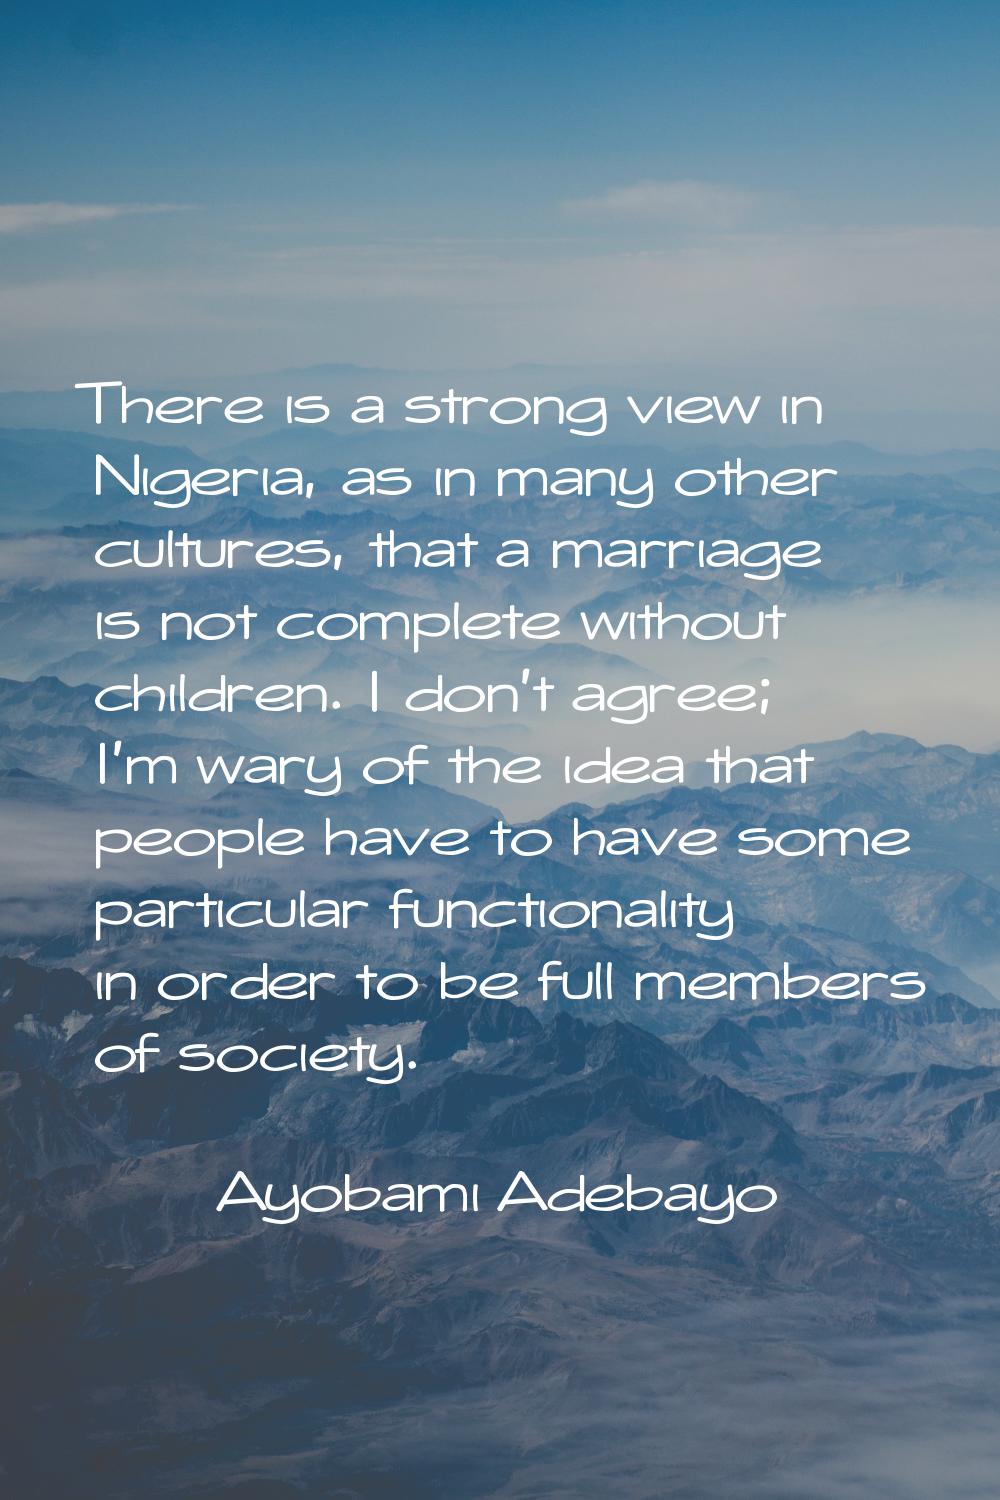 There is a strong view in Nigeria, as in many other cultures, that a marriage is not complete witho